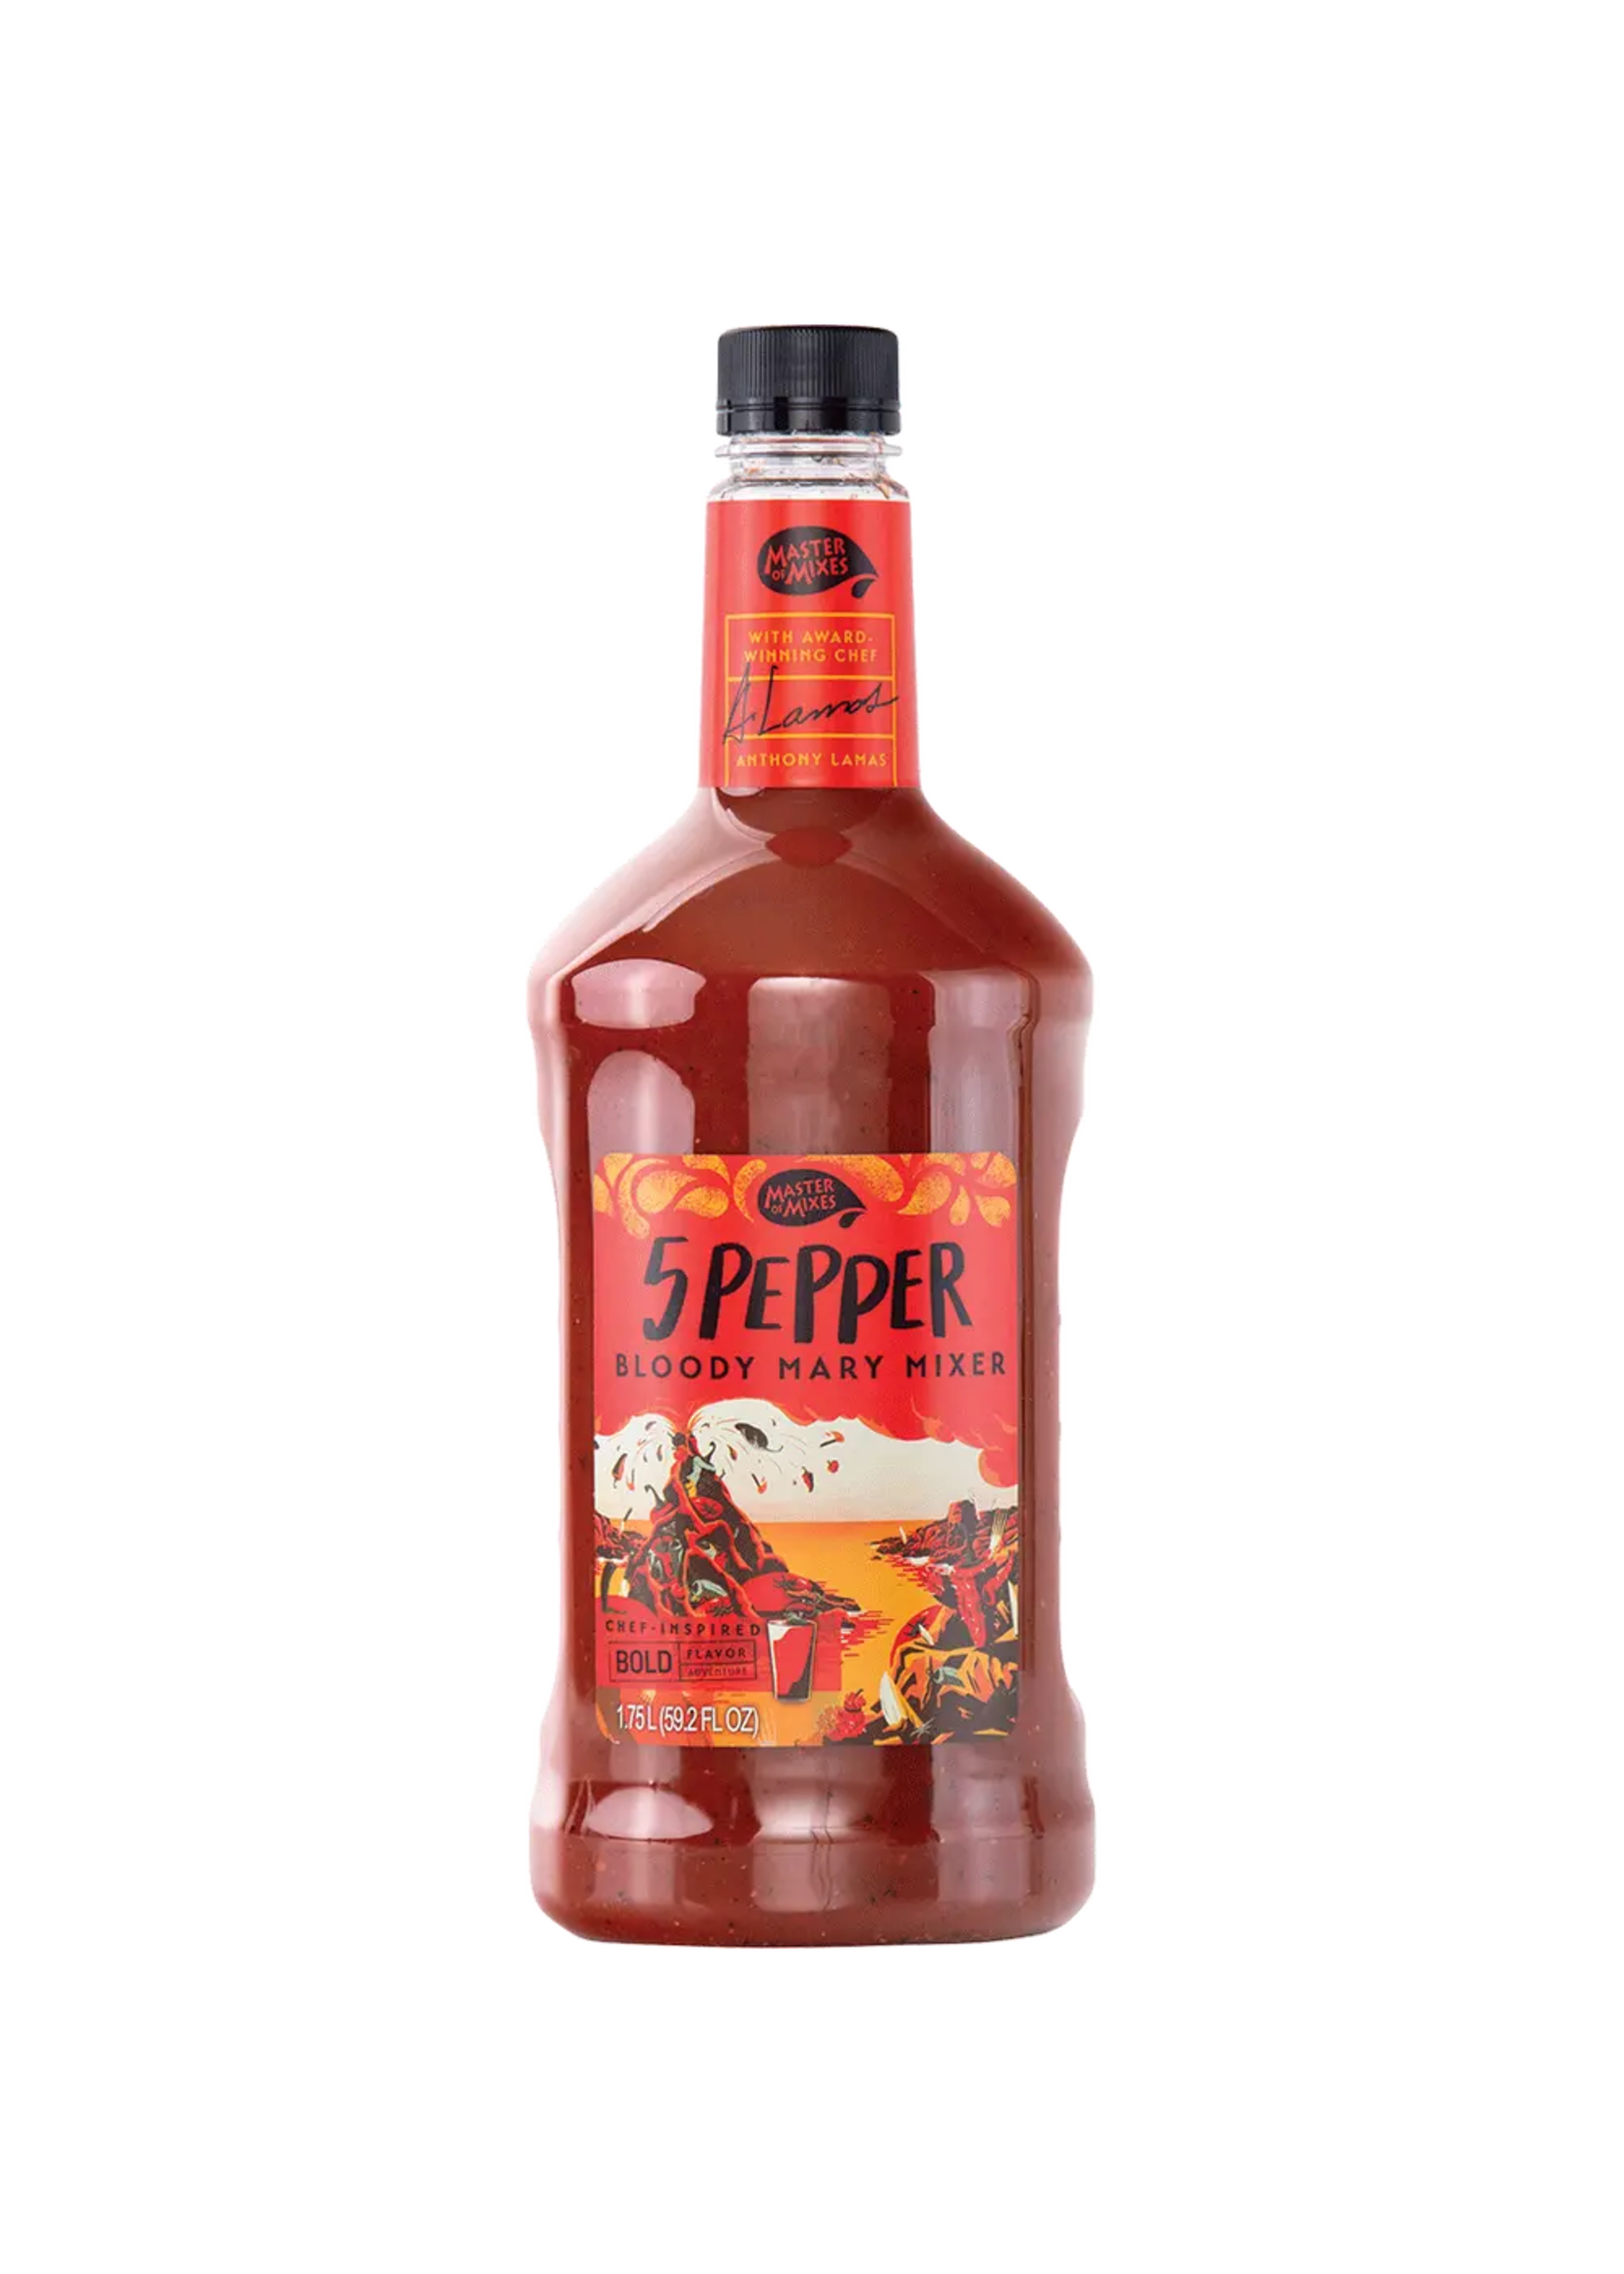 Master of Mixes Master Of Mixes 5 Pepper Bloody Mary Pet 1.75 Ltr